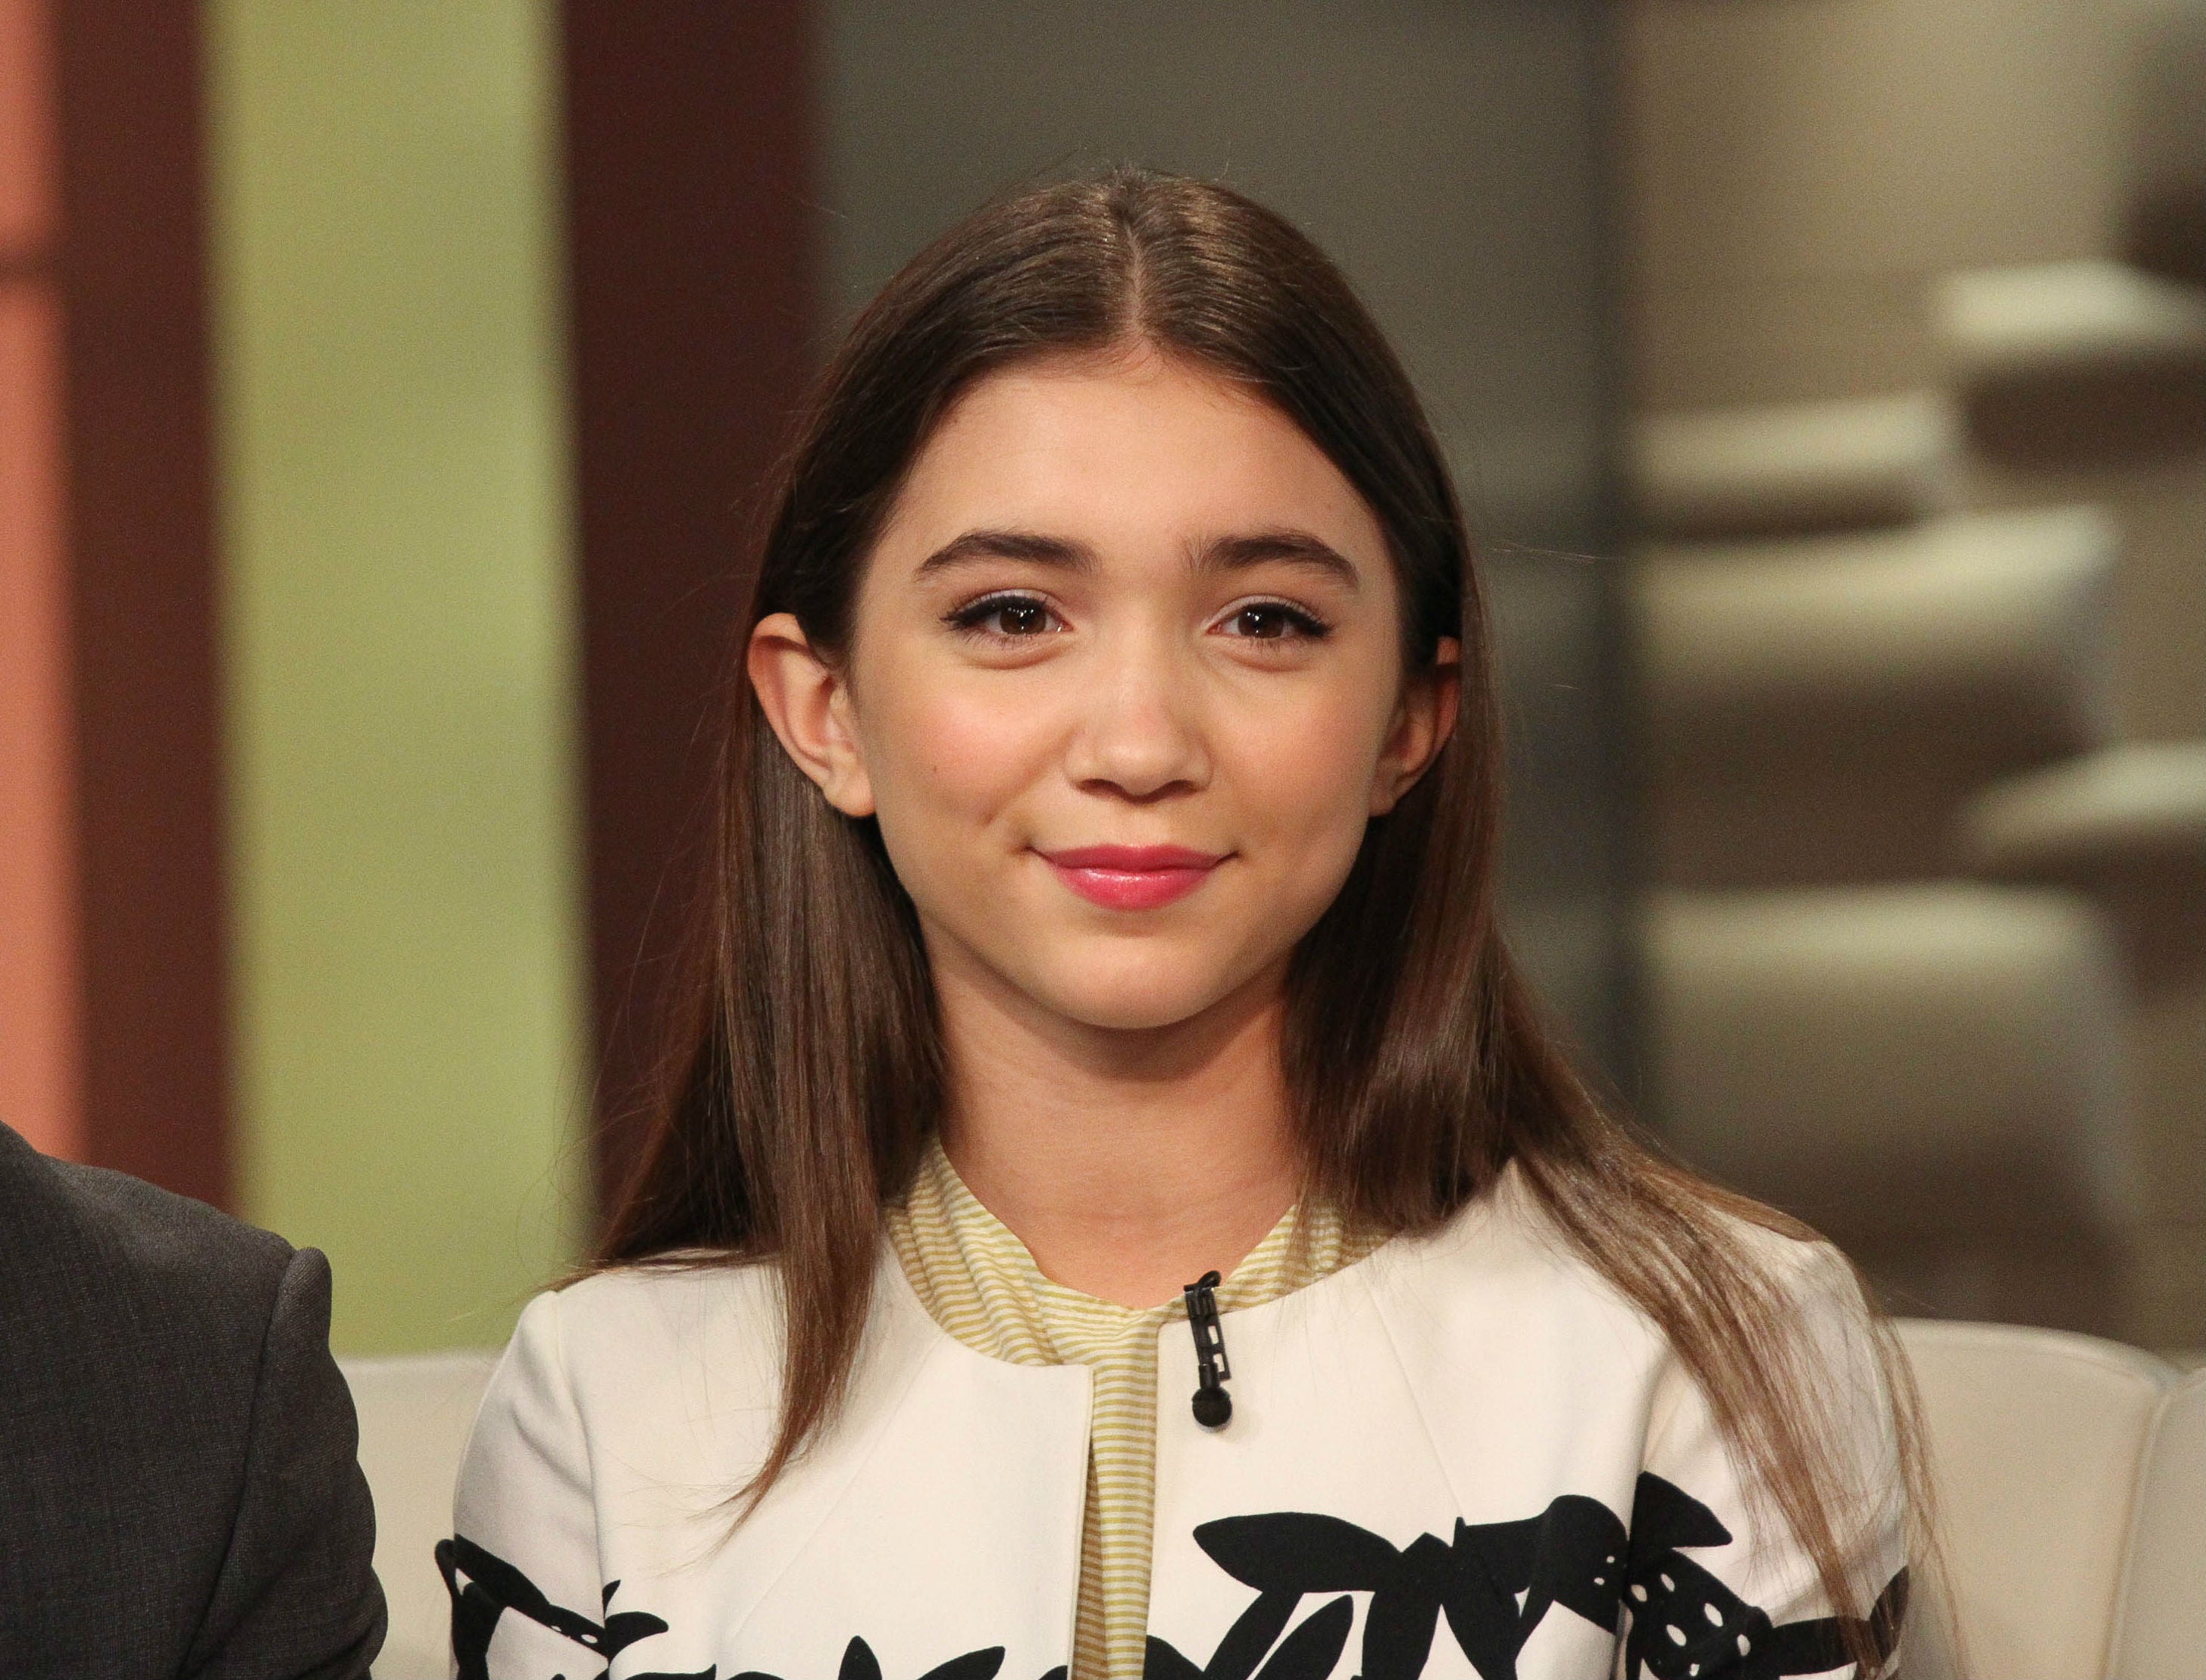 Rowan's response to a question about feminism has blown her fans away